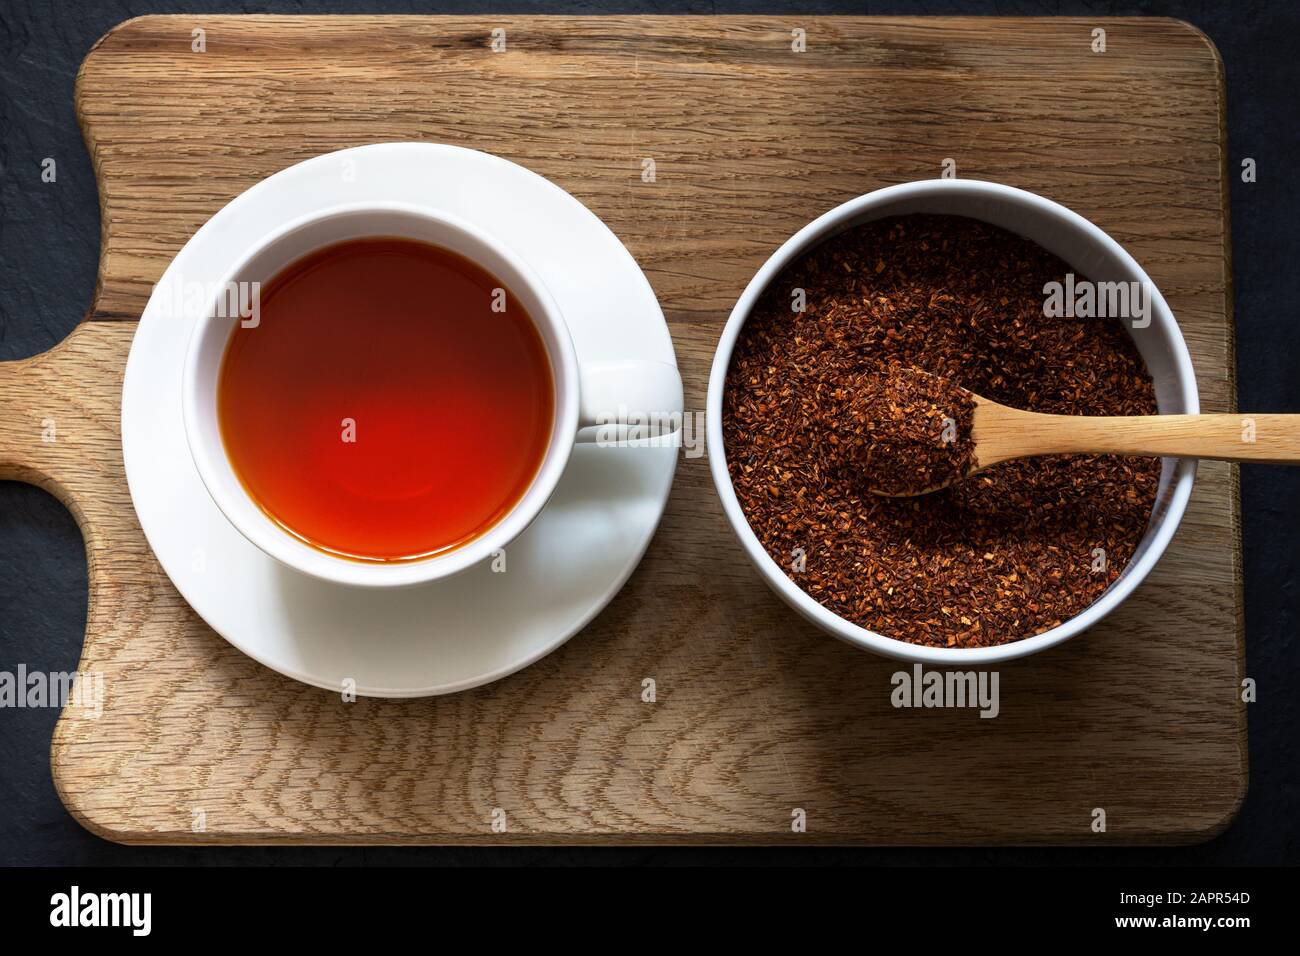 Overhead shot of a cup and saucer containing rooibos (redbush) tea with white bowl of leaves scooped in a wooden spoon. Wooden board with black slate Stock Photo